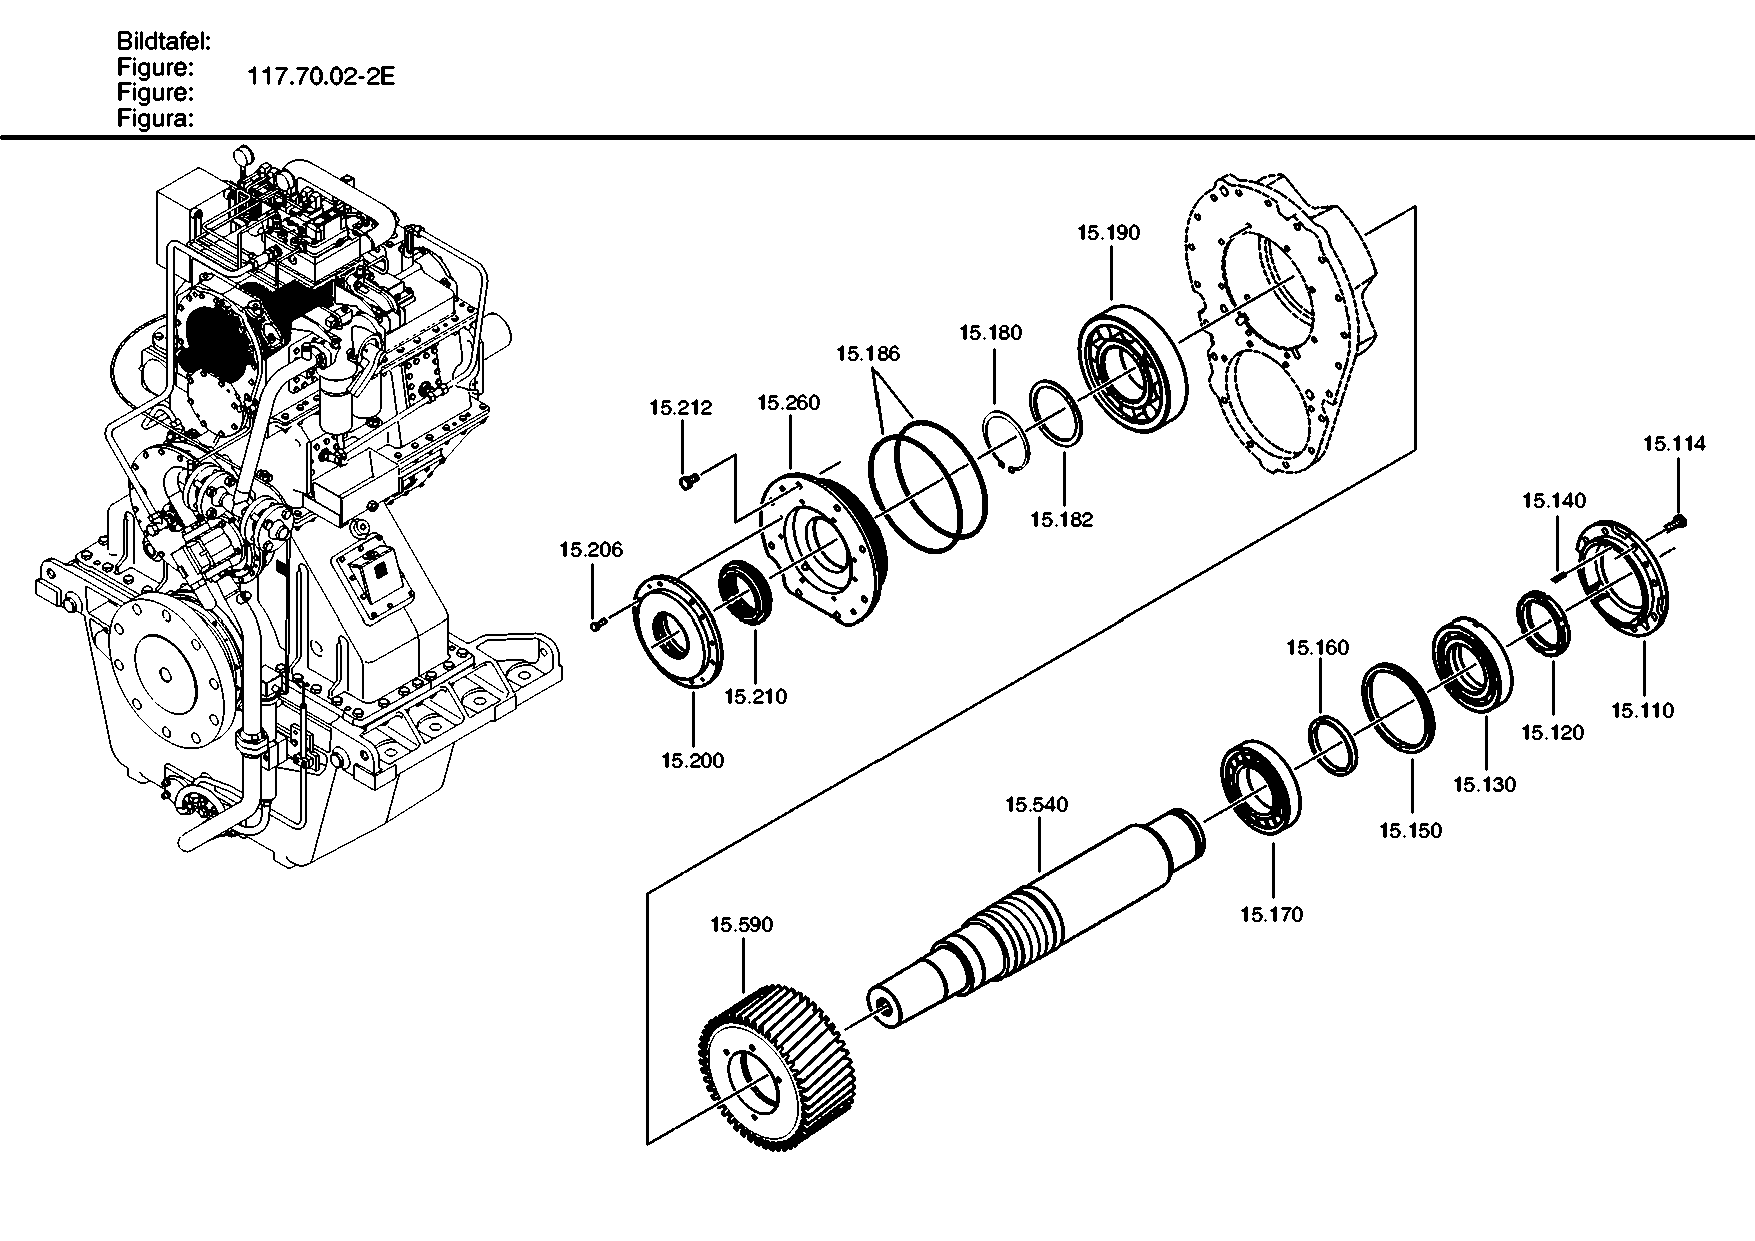 drawing for AGCO F743300020060 - O-RING (figure 2)